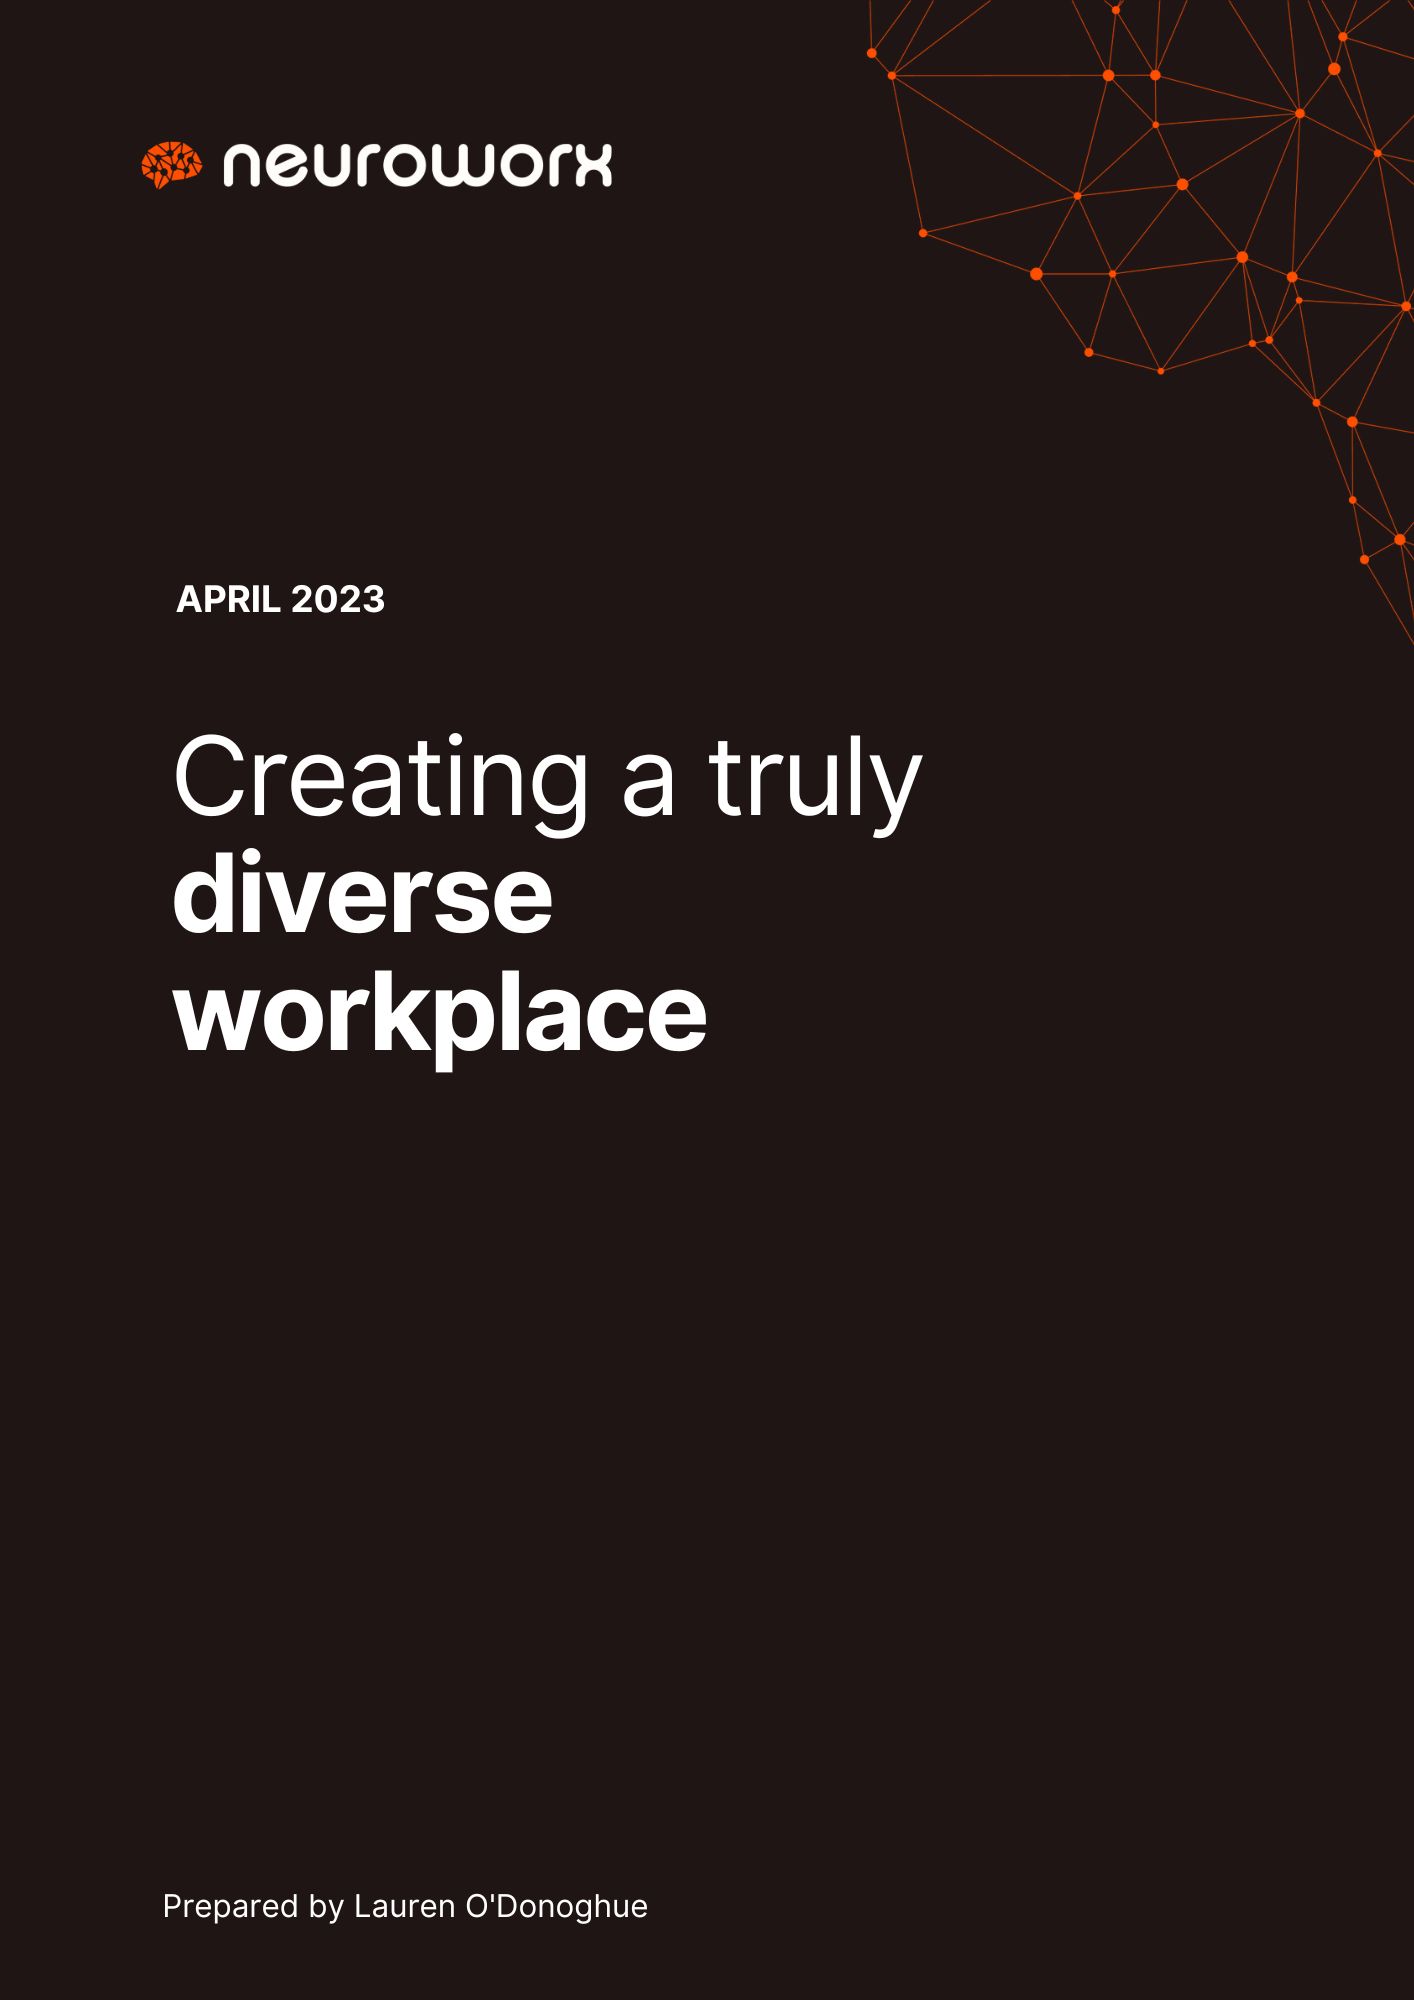 How To Create A Truly Diverse Workplace (2023 Guide)